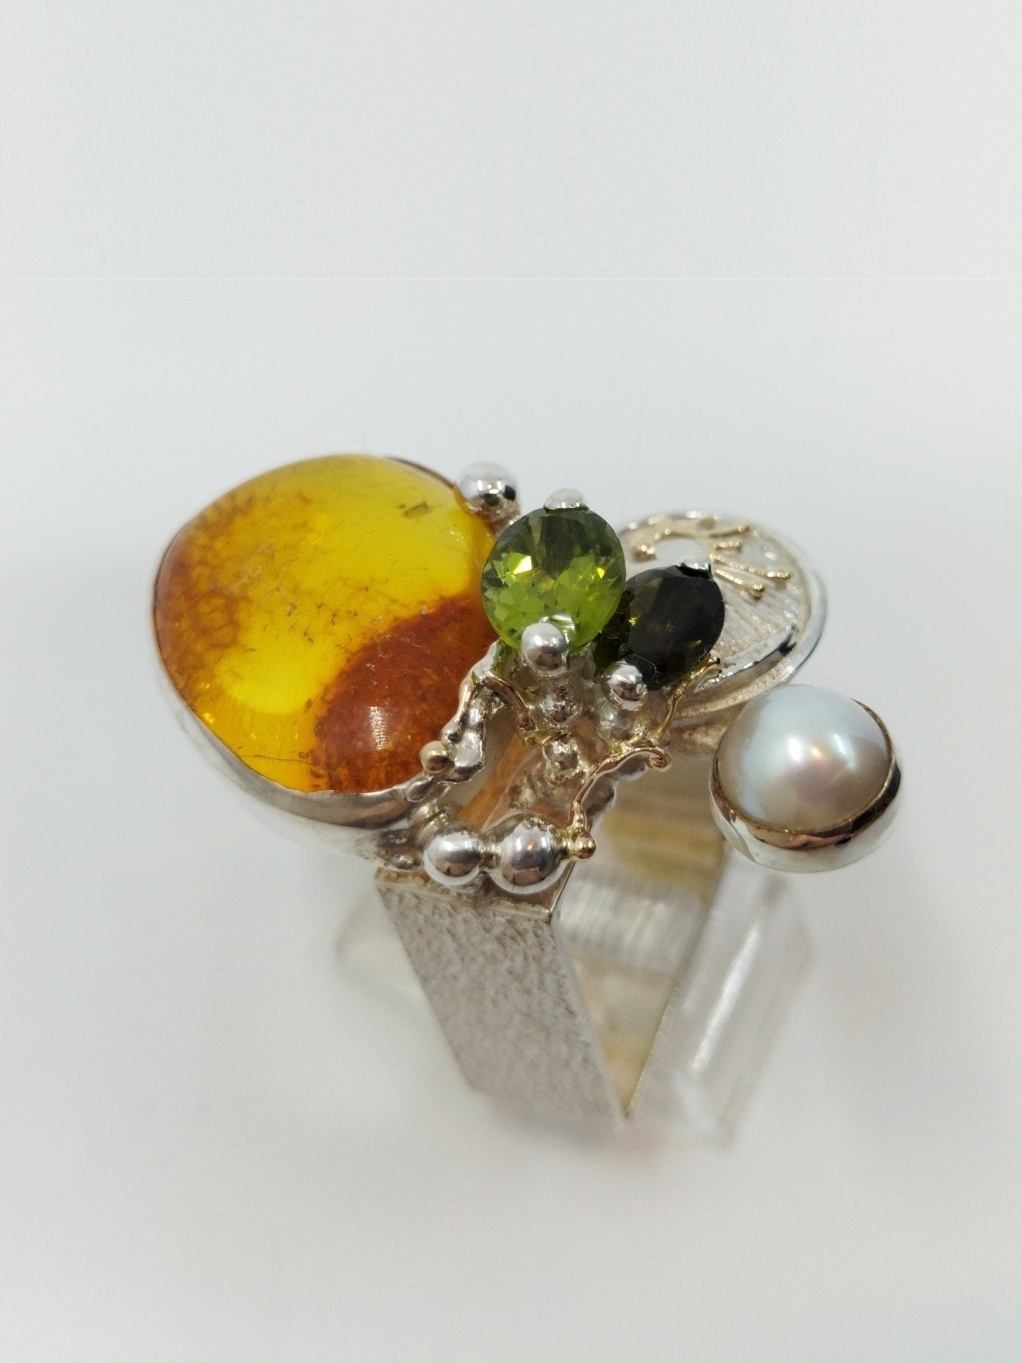 original maker's handcrafted jewellery, gregory pyra piro ring 84942, sterling silver and 14 karat gold, amber, peridot, green tourmaline, pearl, art nouveau inspired fashion jewelry, jewellery with natural pearls and semi precious stones, contemporary jewelry from silver and gold, art jewellery with colour stones, contemporary jewelry with pearls and color stones, jewellery made from silver and gold with natural pearls and natural gemstones, shopping for diamonds and designer jewellery, accessories with color stones and pearls, artisan handcrafted jewellery with natural gemstones and natural pearls, jewelry made first hand, art and craft gallery artisan handcrafted jewellery for sale, jewellery with ocean and seashell theme